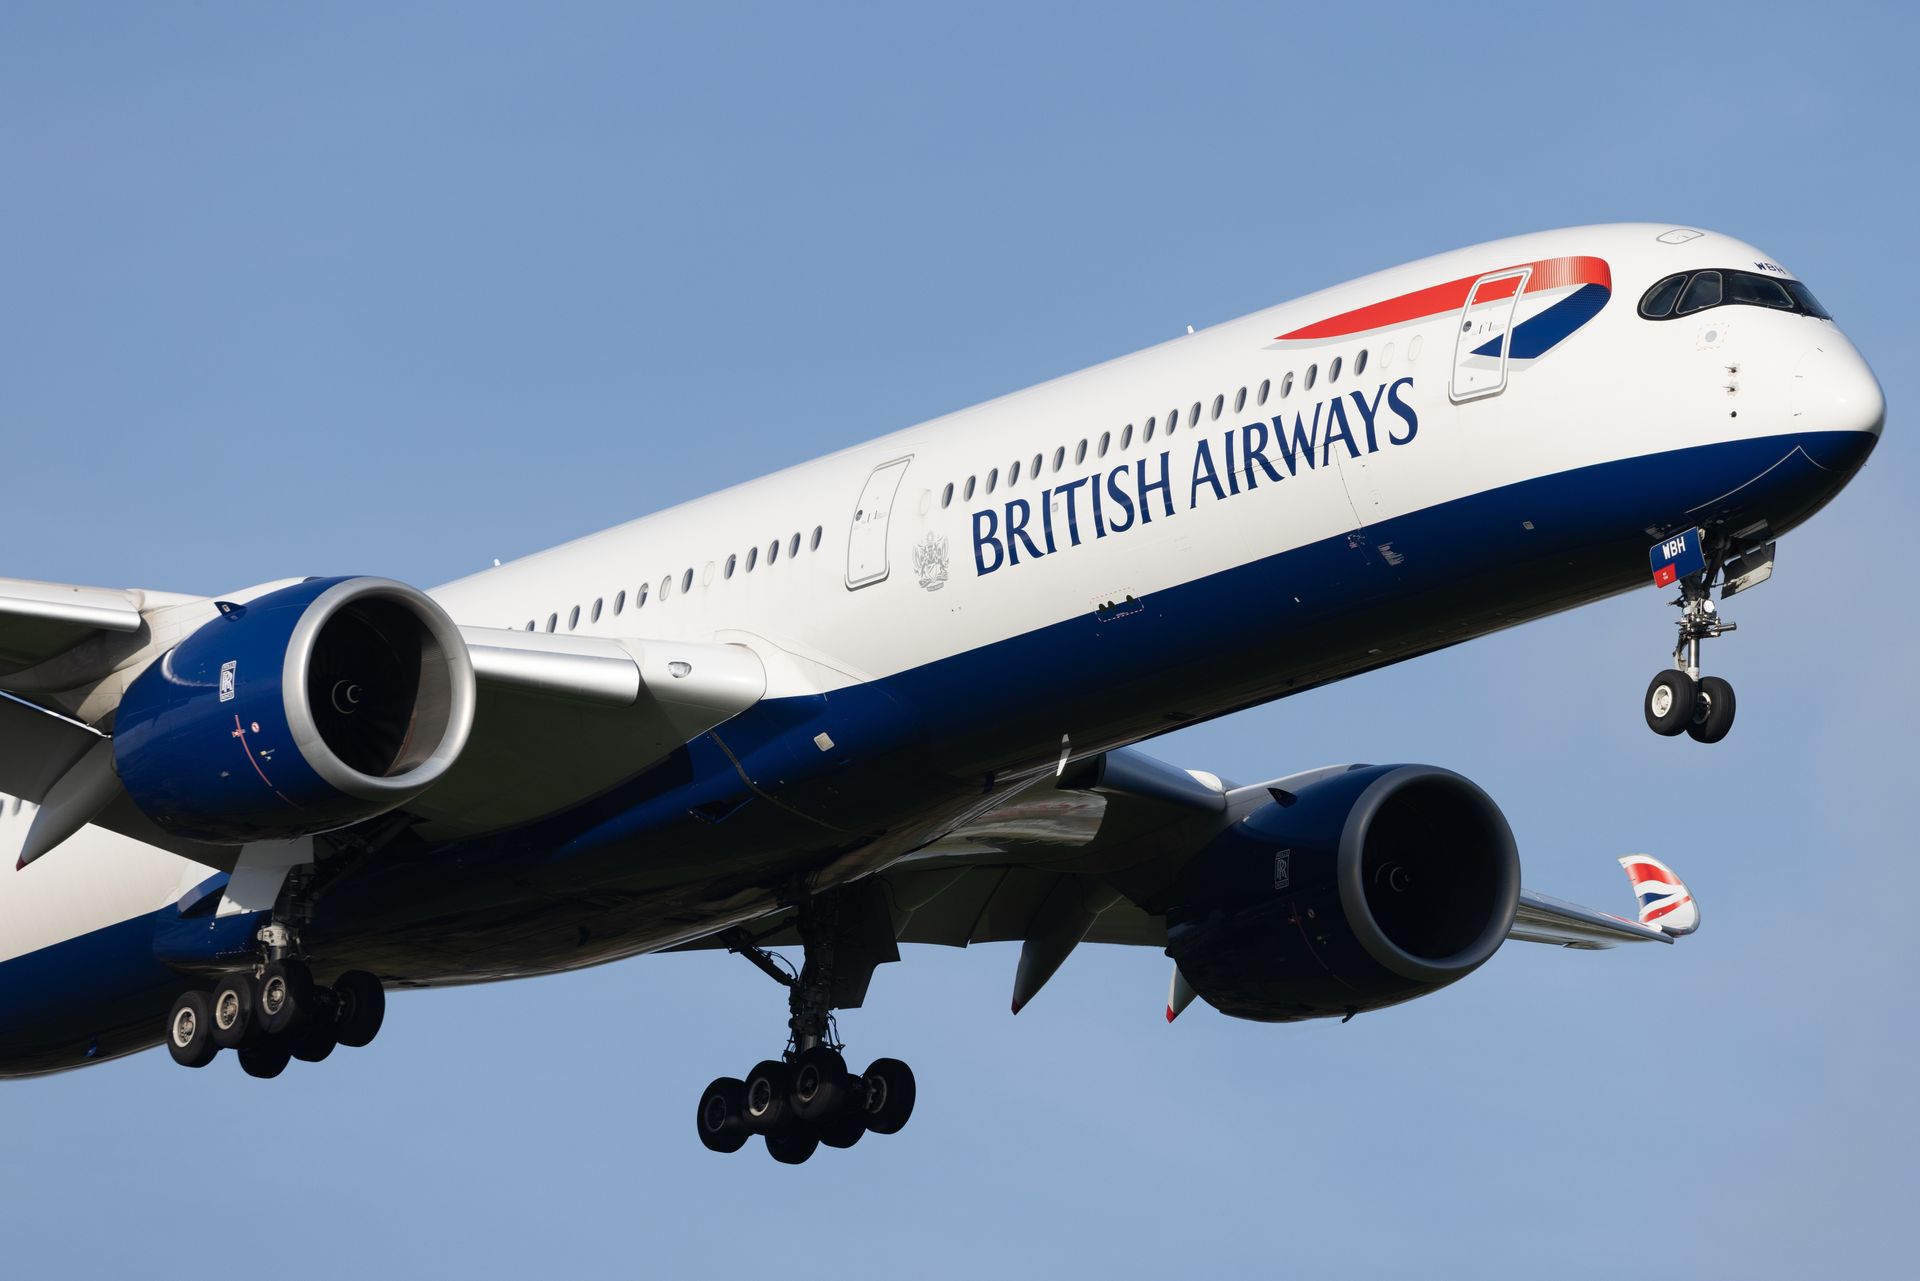 A british airways plane is flying in the sky